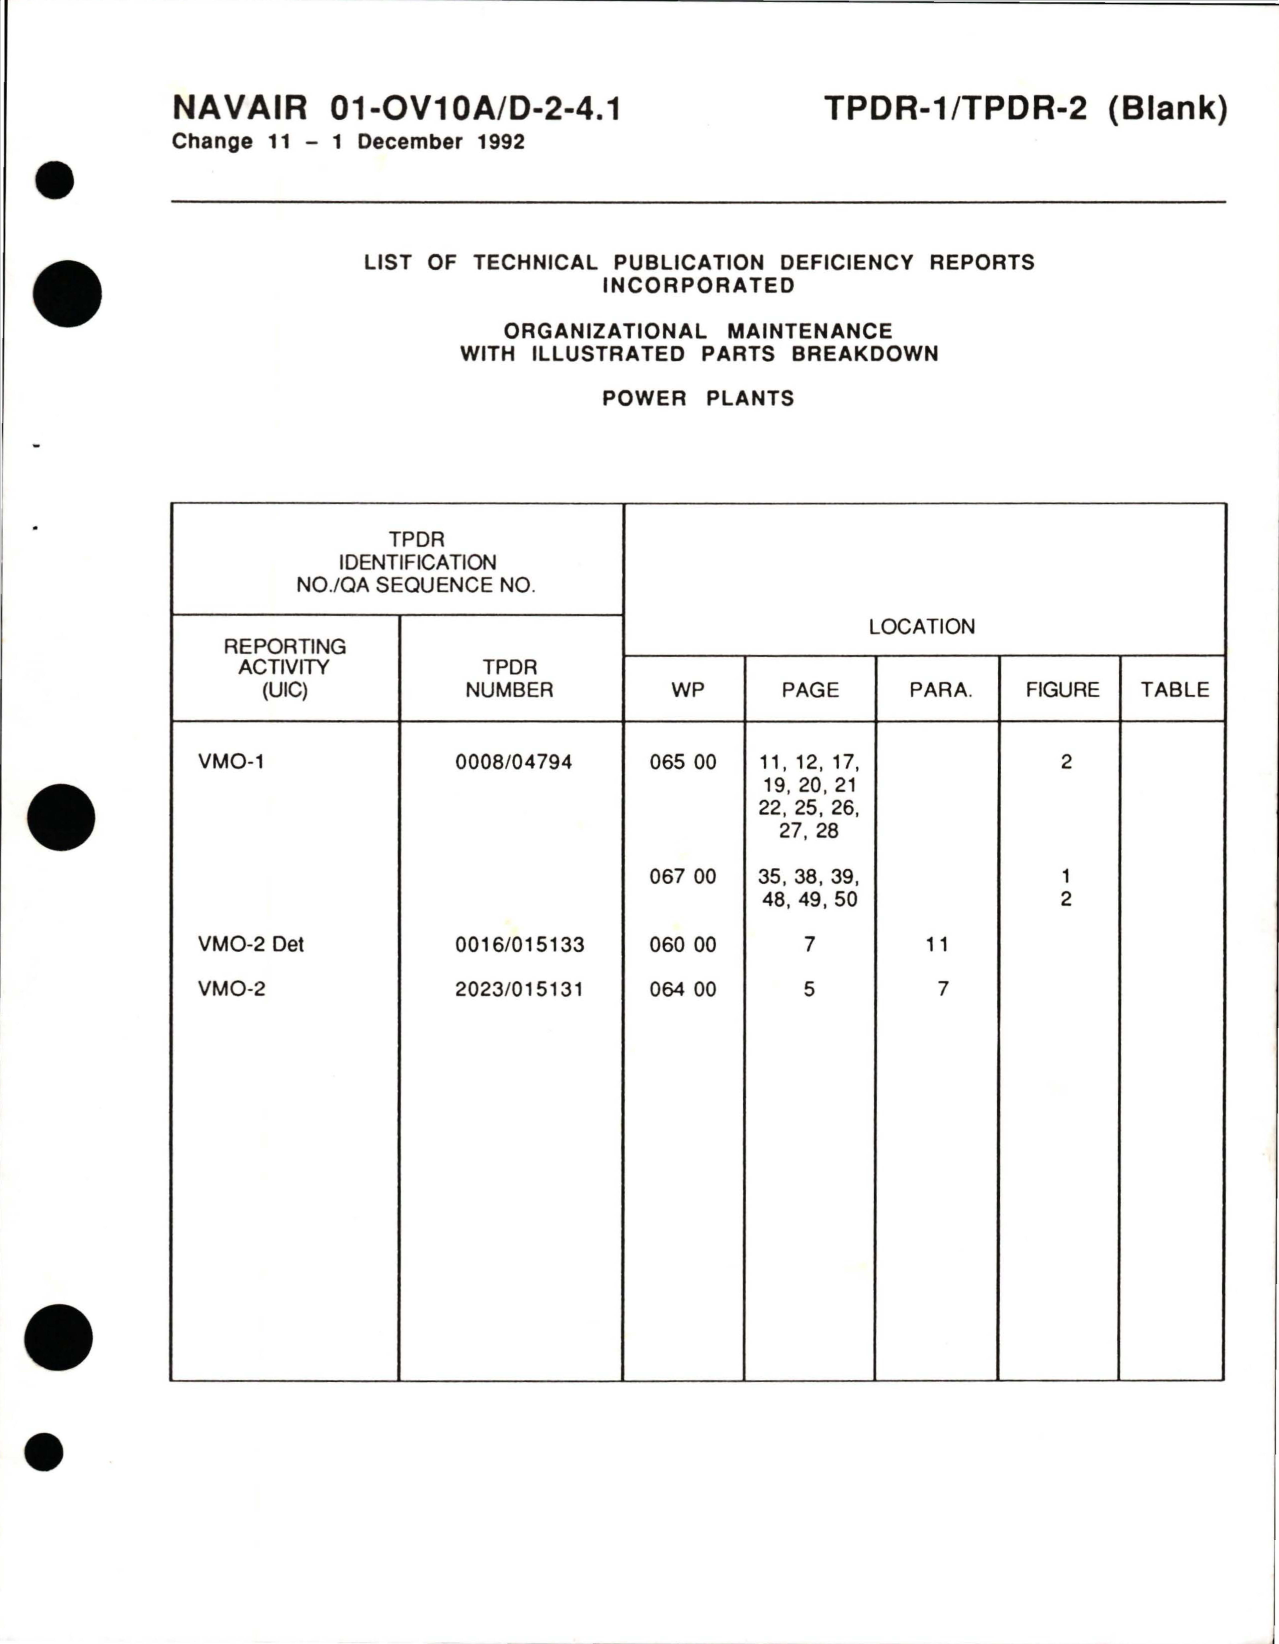 Sample page 9 from AirCorps Library document: Organizational Maintenance with Illustrated Parts Breakdown for Power Plants on the OV-10A/D